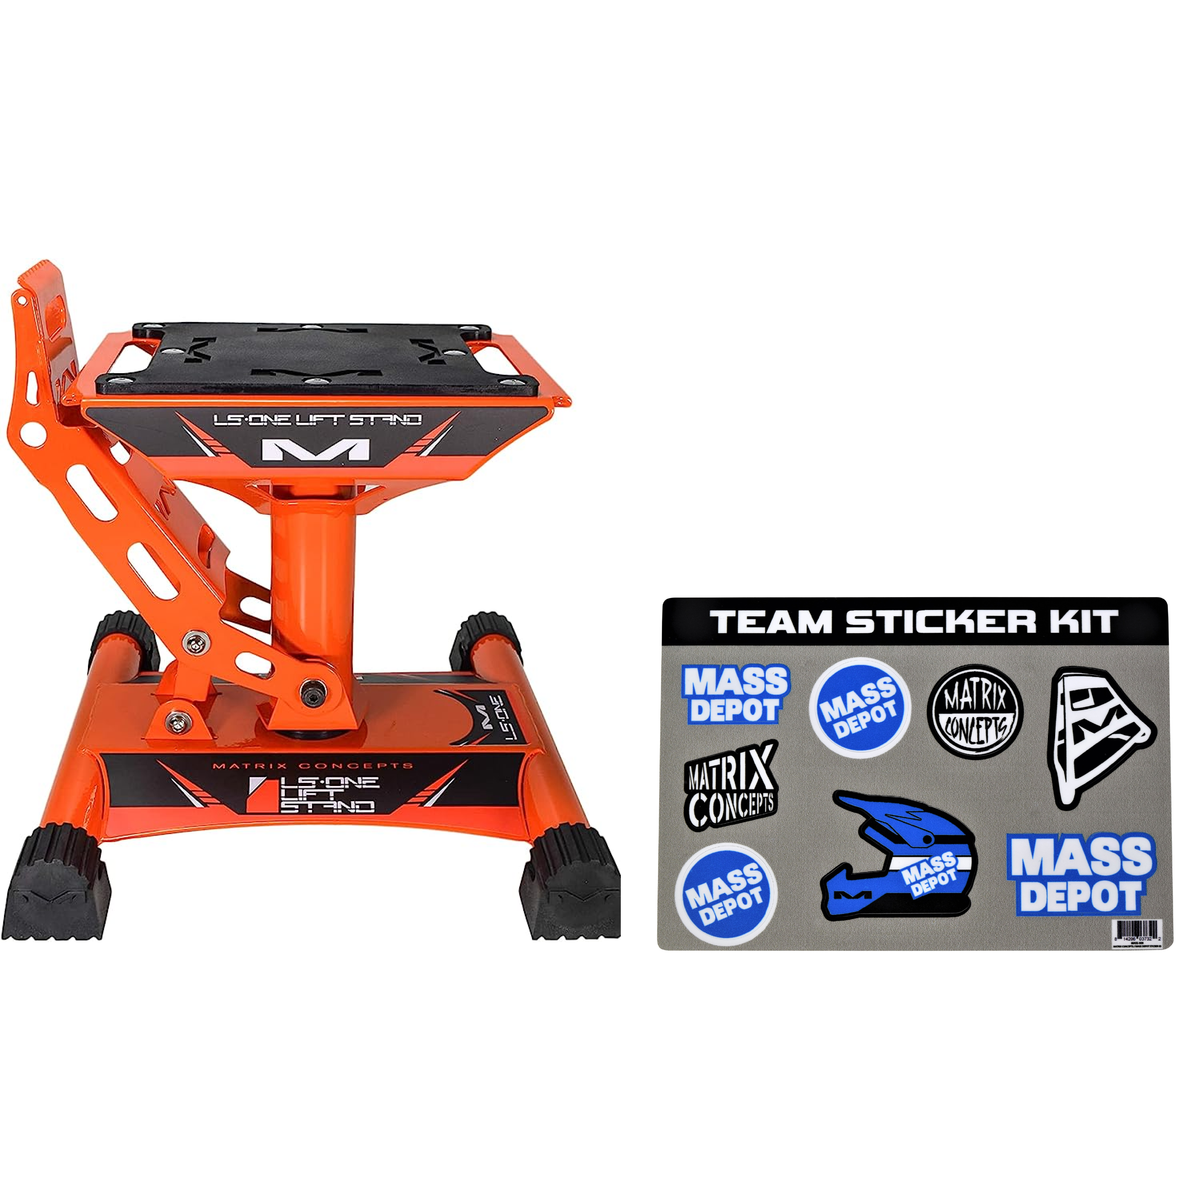 Matrix Concepts LS1 Lift Stand with 500 lbs Capacity for Dirt Bikes (Orange)